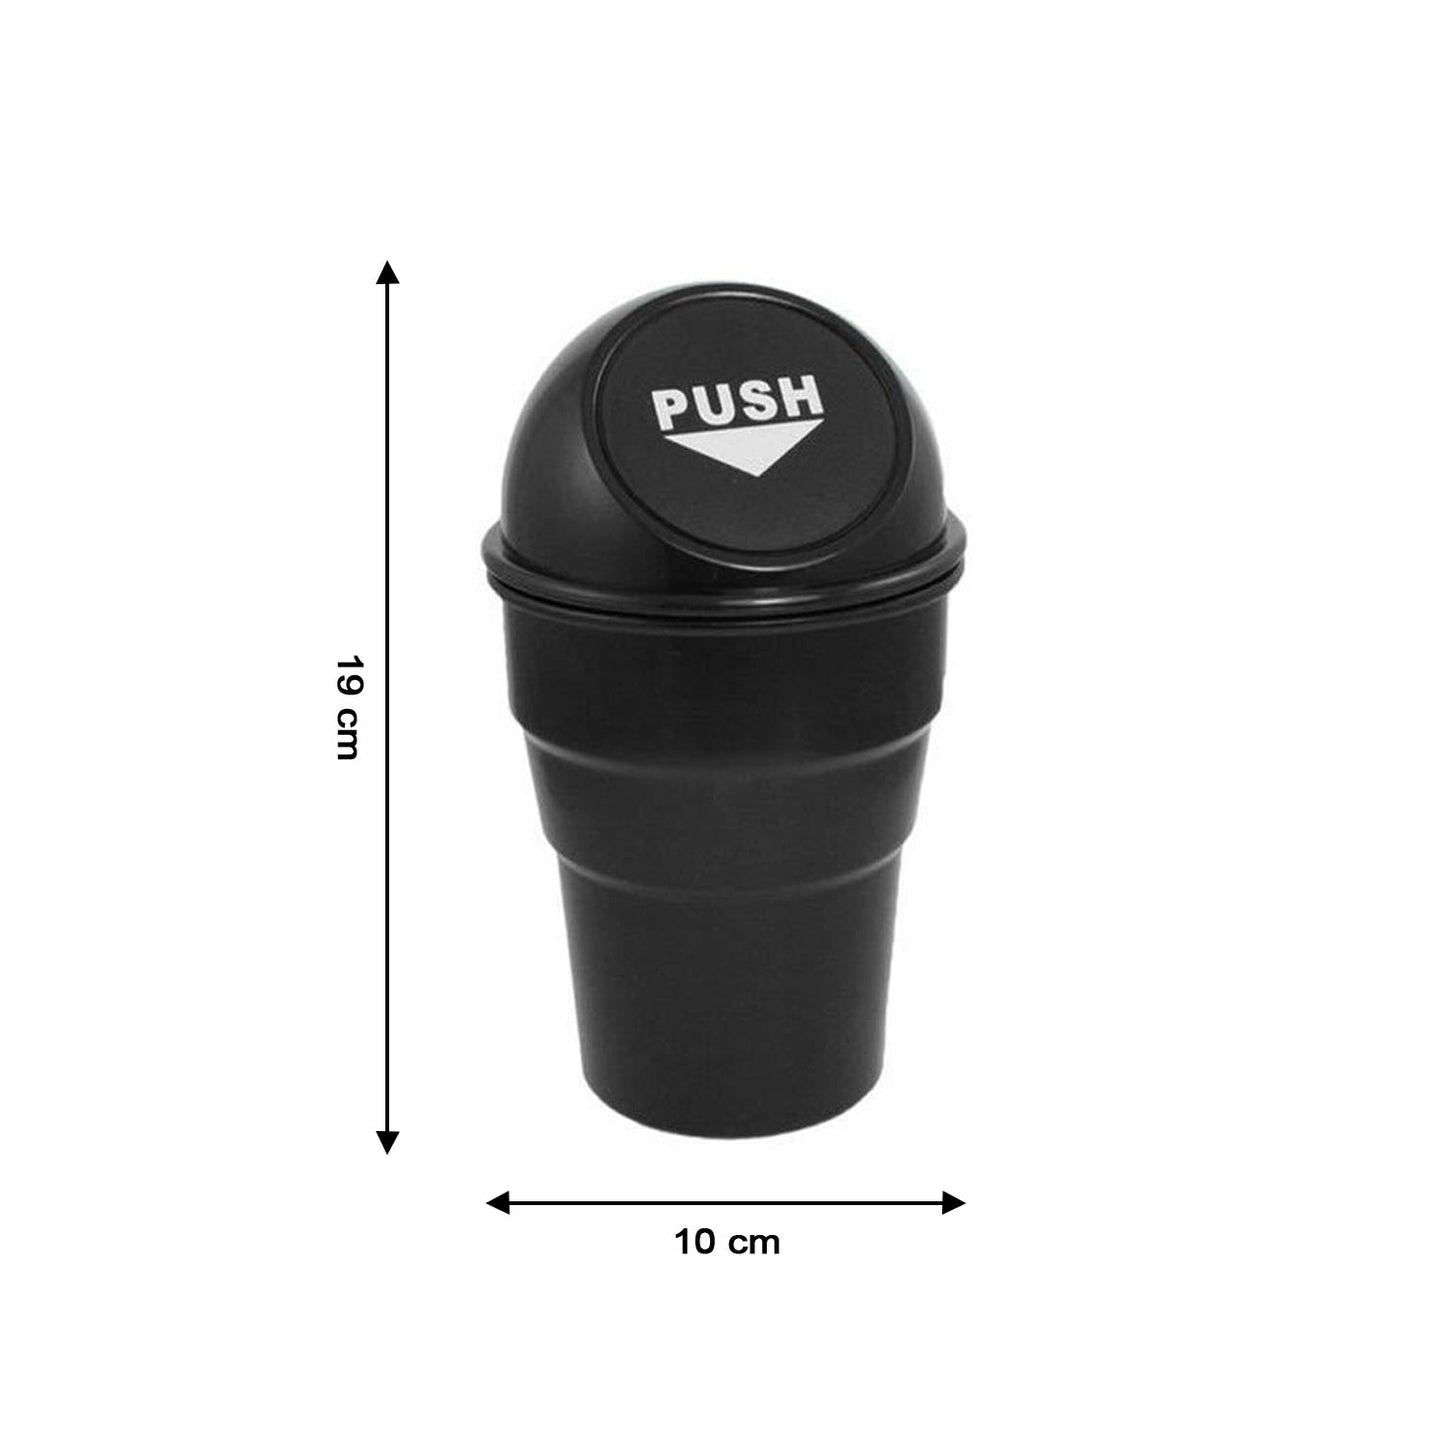 0537 B Car Dustbin widely used in many kinds of places like offices, household, cars, hospitals etc. for storing garbage and all rough stuffs. Dukandaily